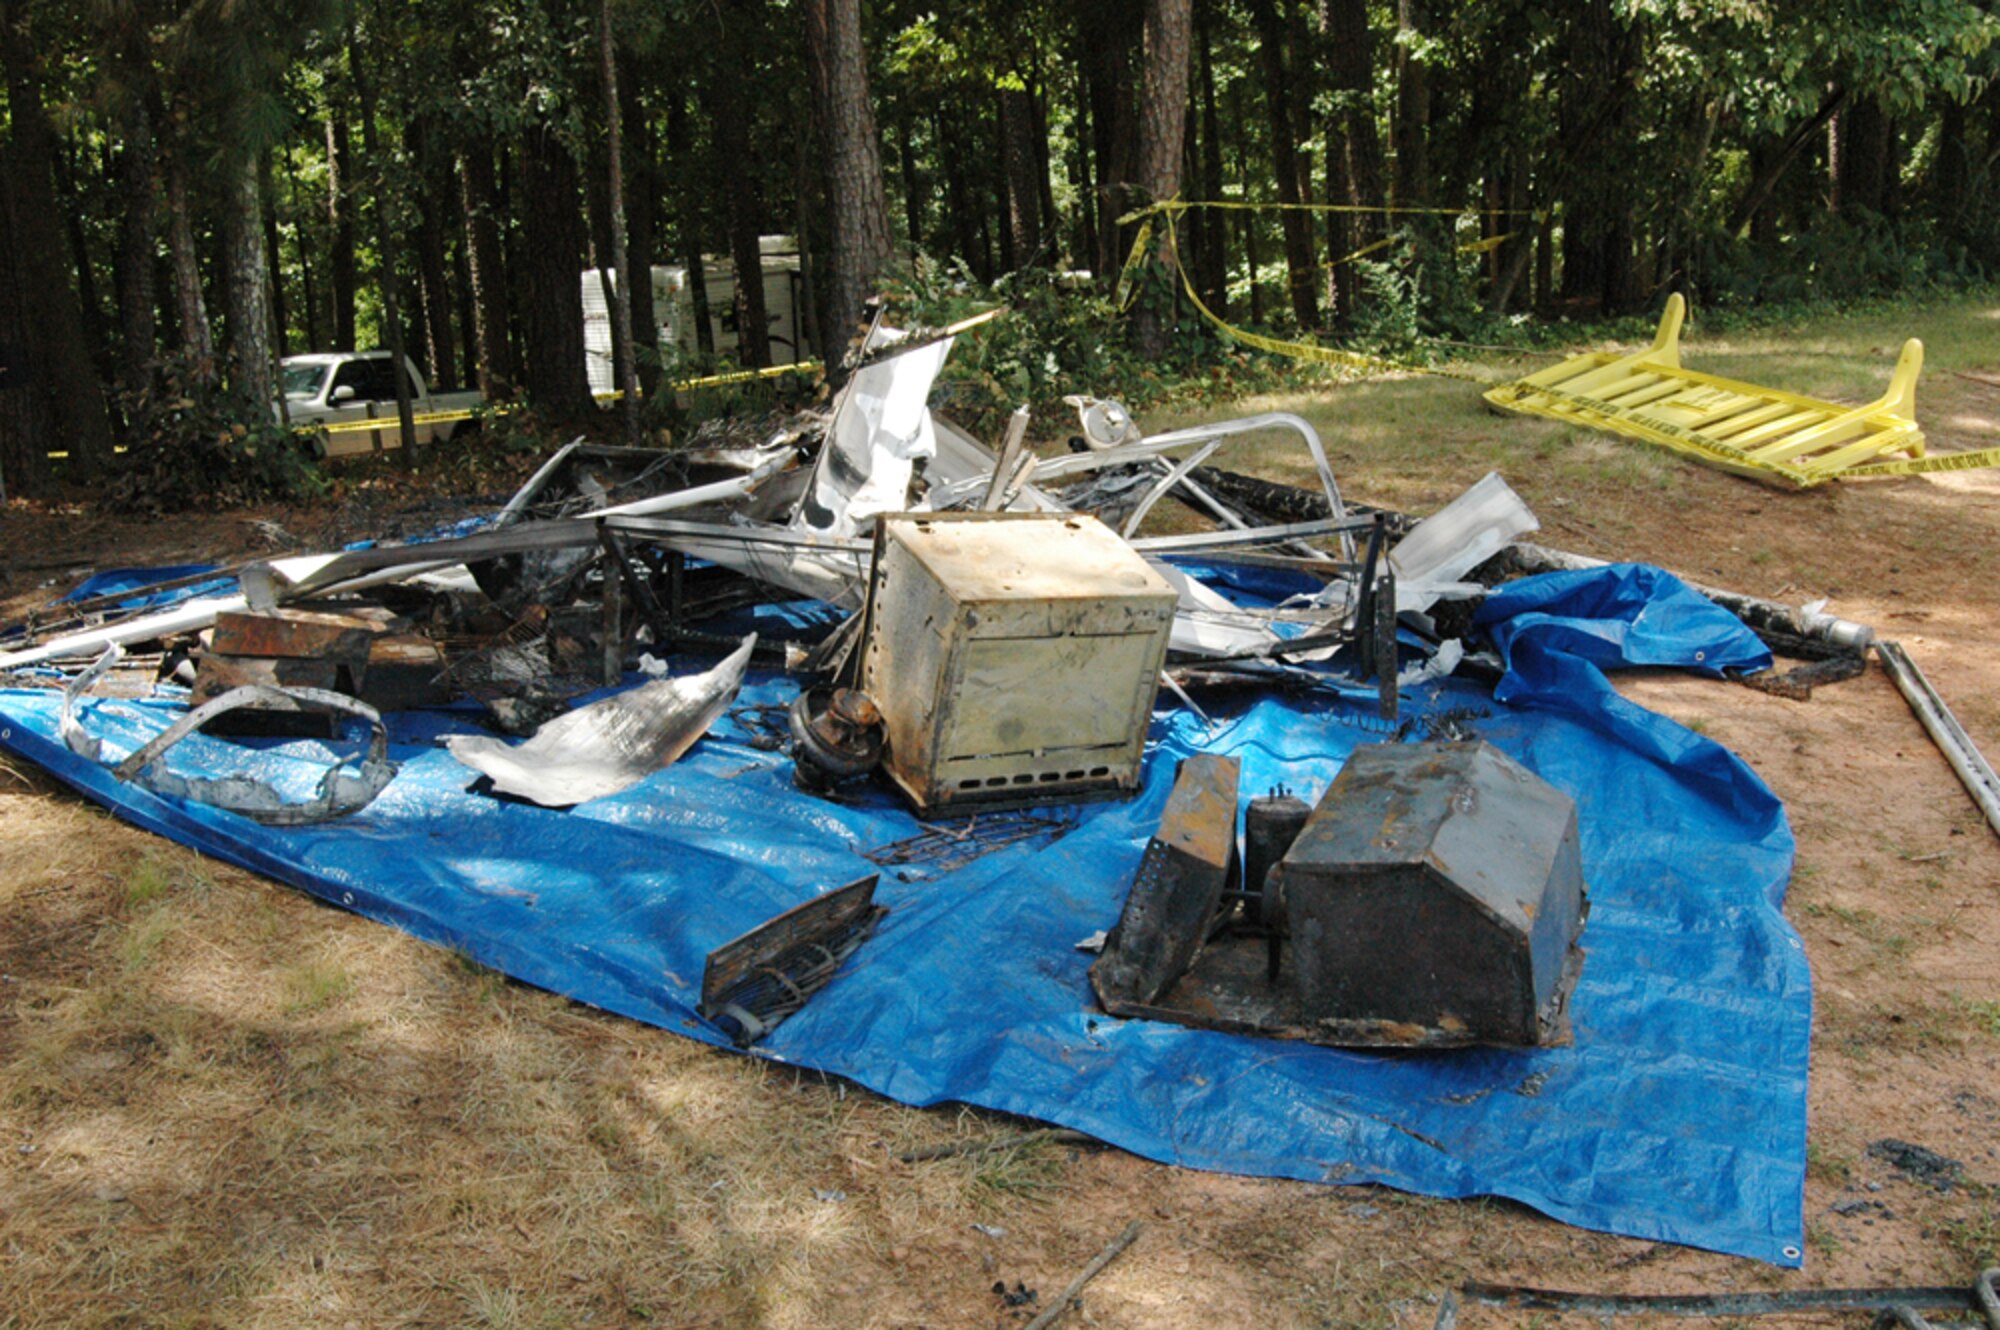 Base officials laid out items from a recreational trailer that caught on fire around 2:30 a.m. July 17. Nearly a dozen firefighters extinguished the blaze, which caused $30,000 in damages. The cause is currently under investigation. (U.S. Air Force photo/Travon Dennis)